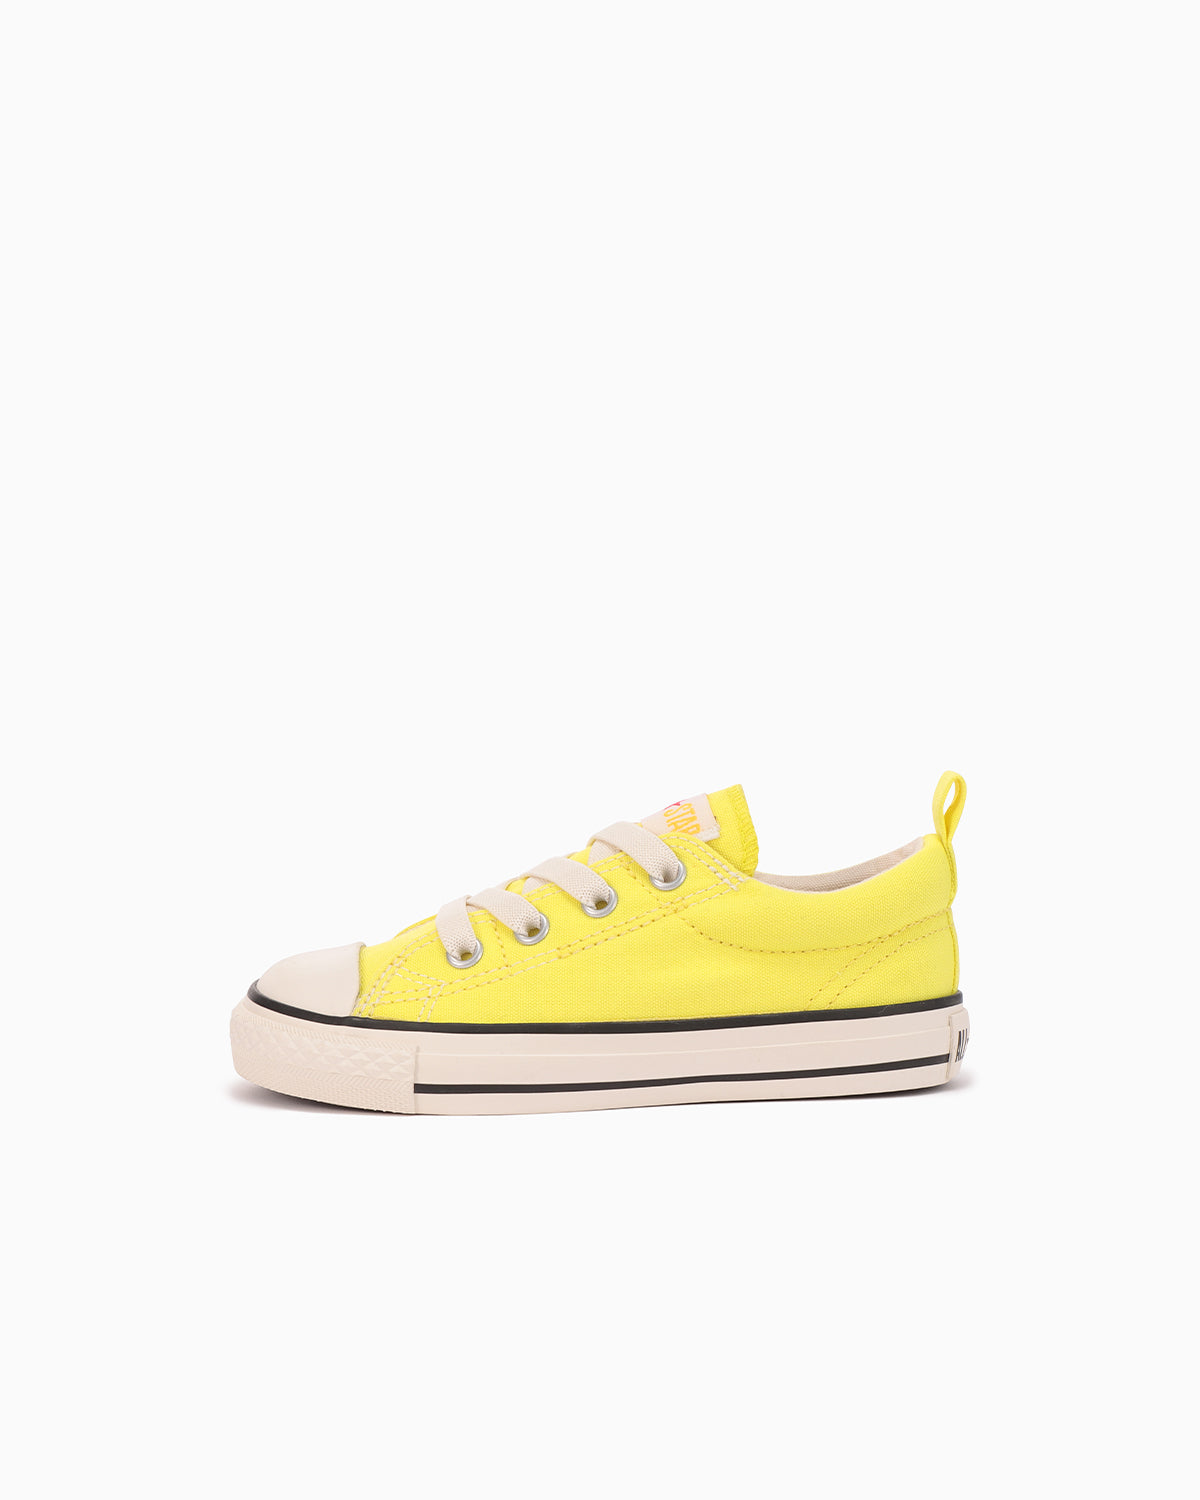 CHILD ALL STAR N NEONCOLORS OF SLIP OX